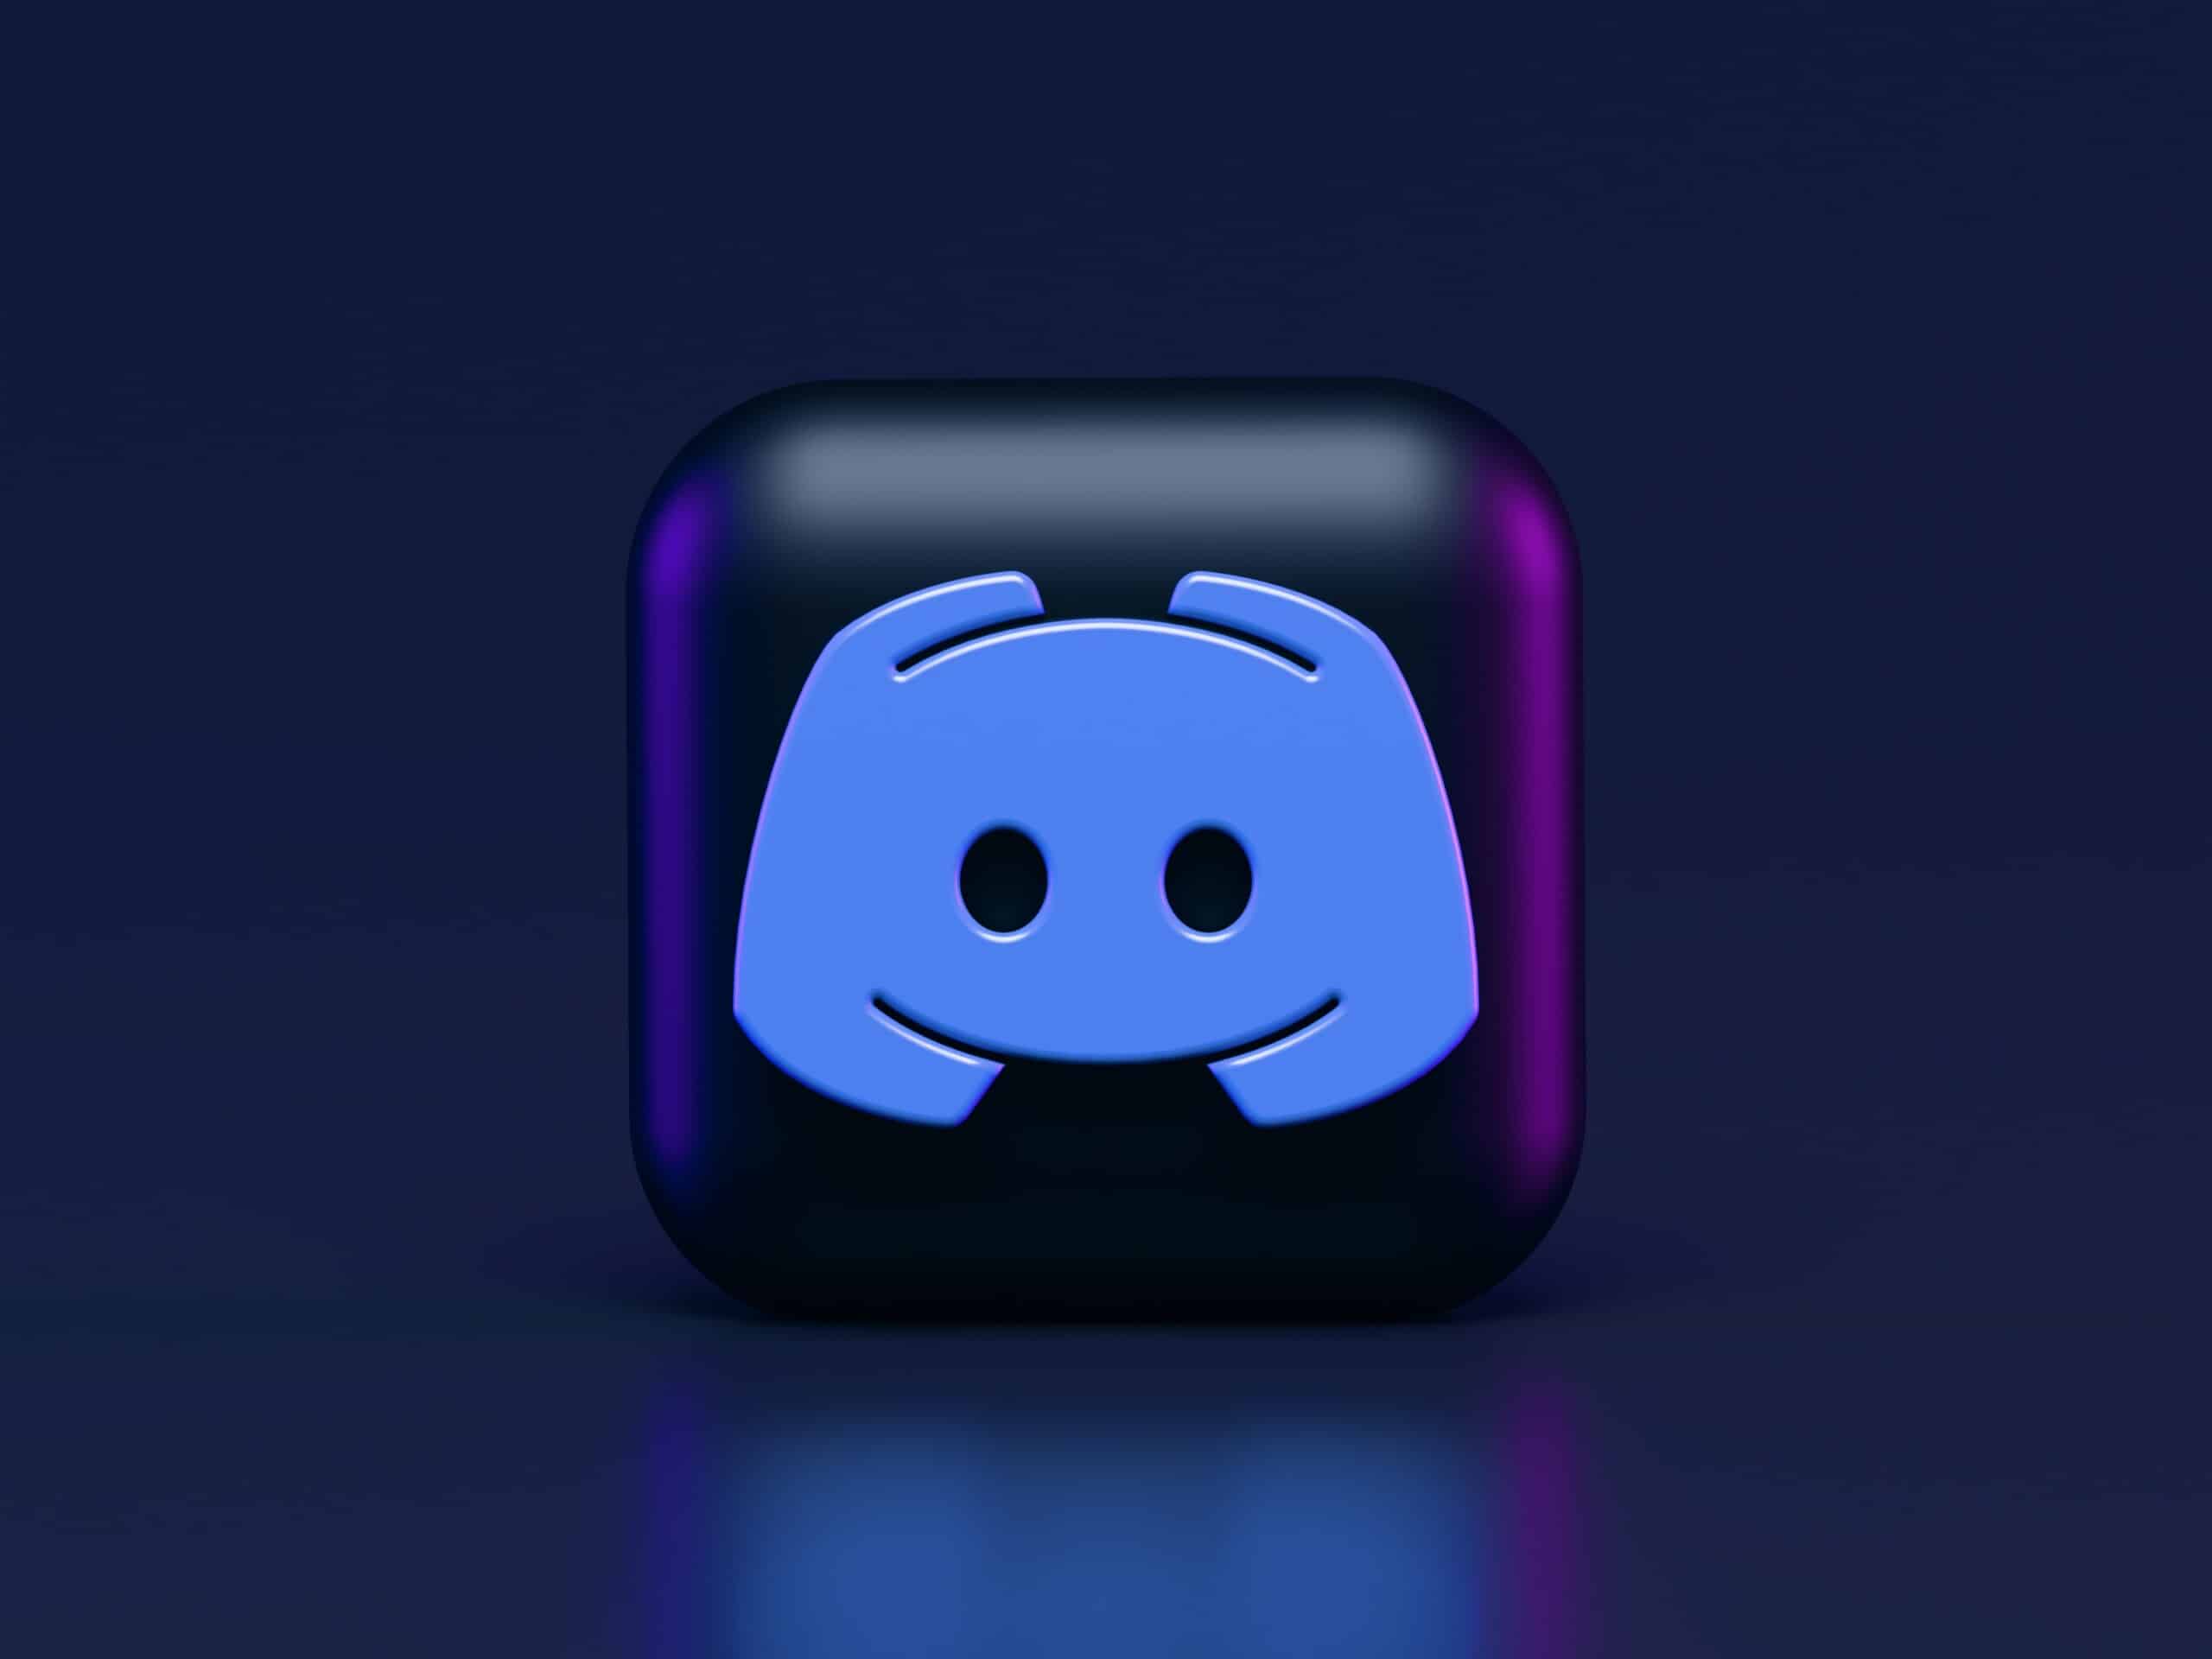 Discord 3d Icon Concept. Dark Mode Style. Write me, if you need similar icons for your products ????